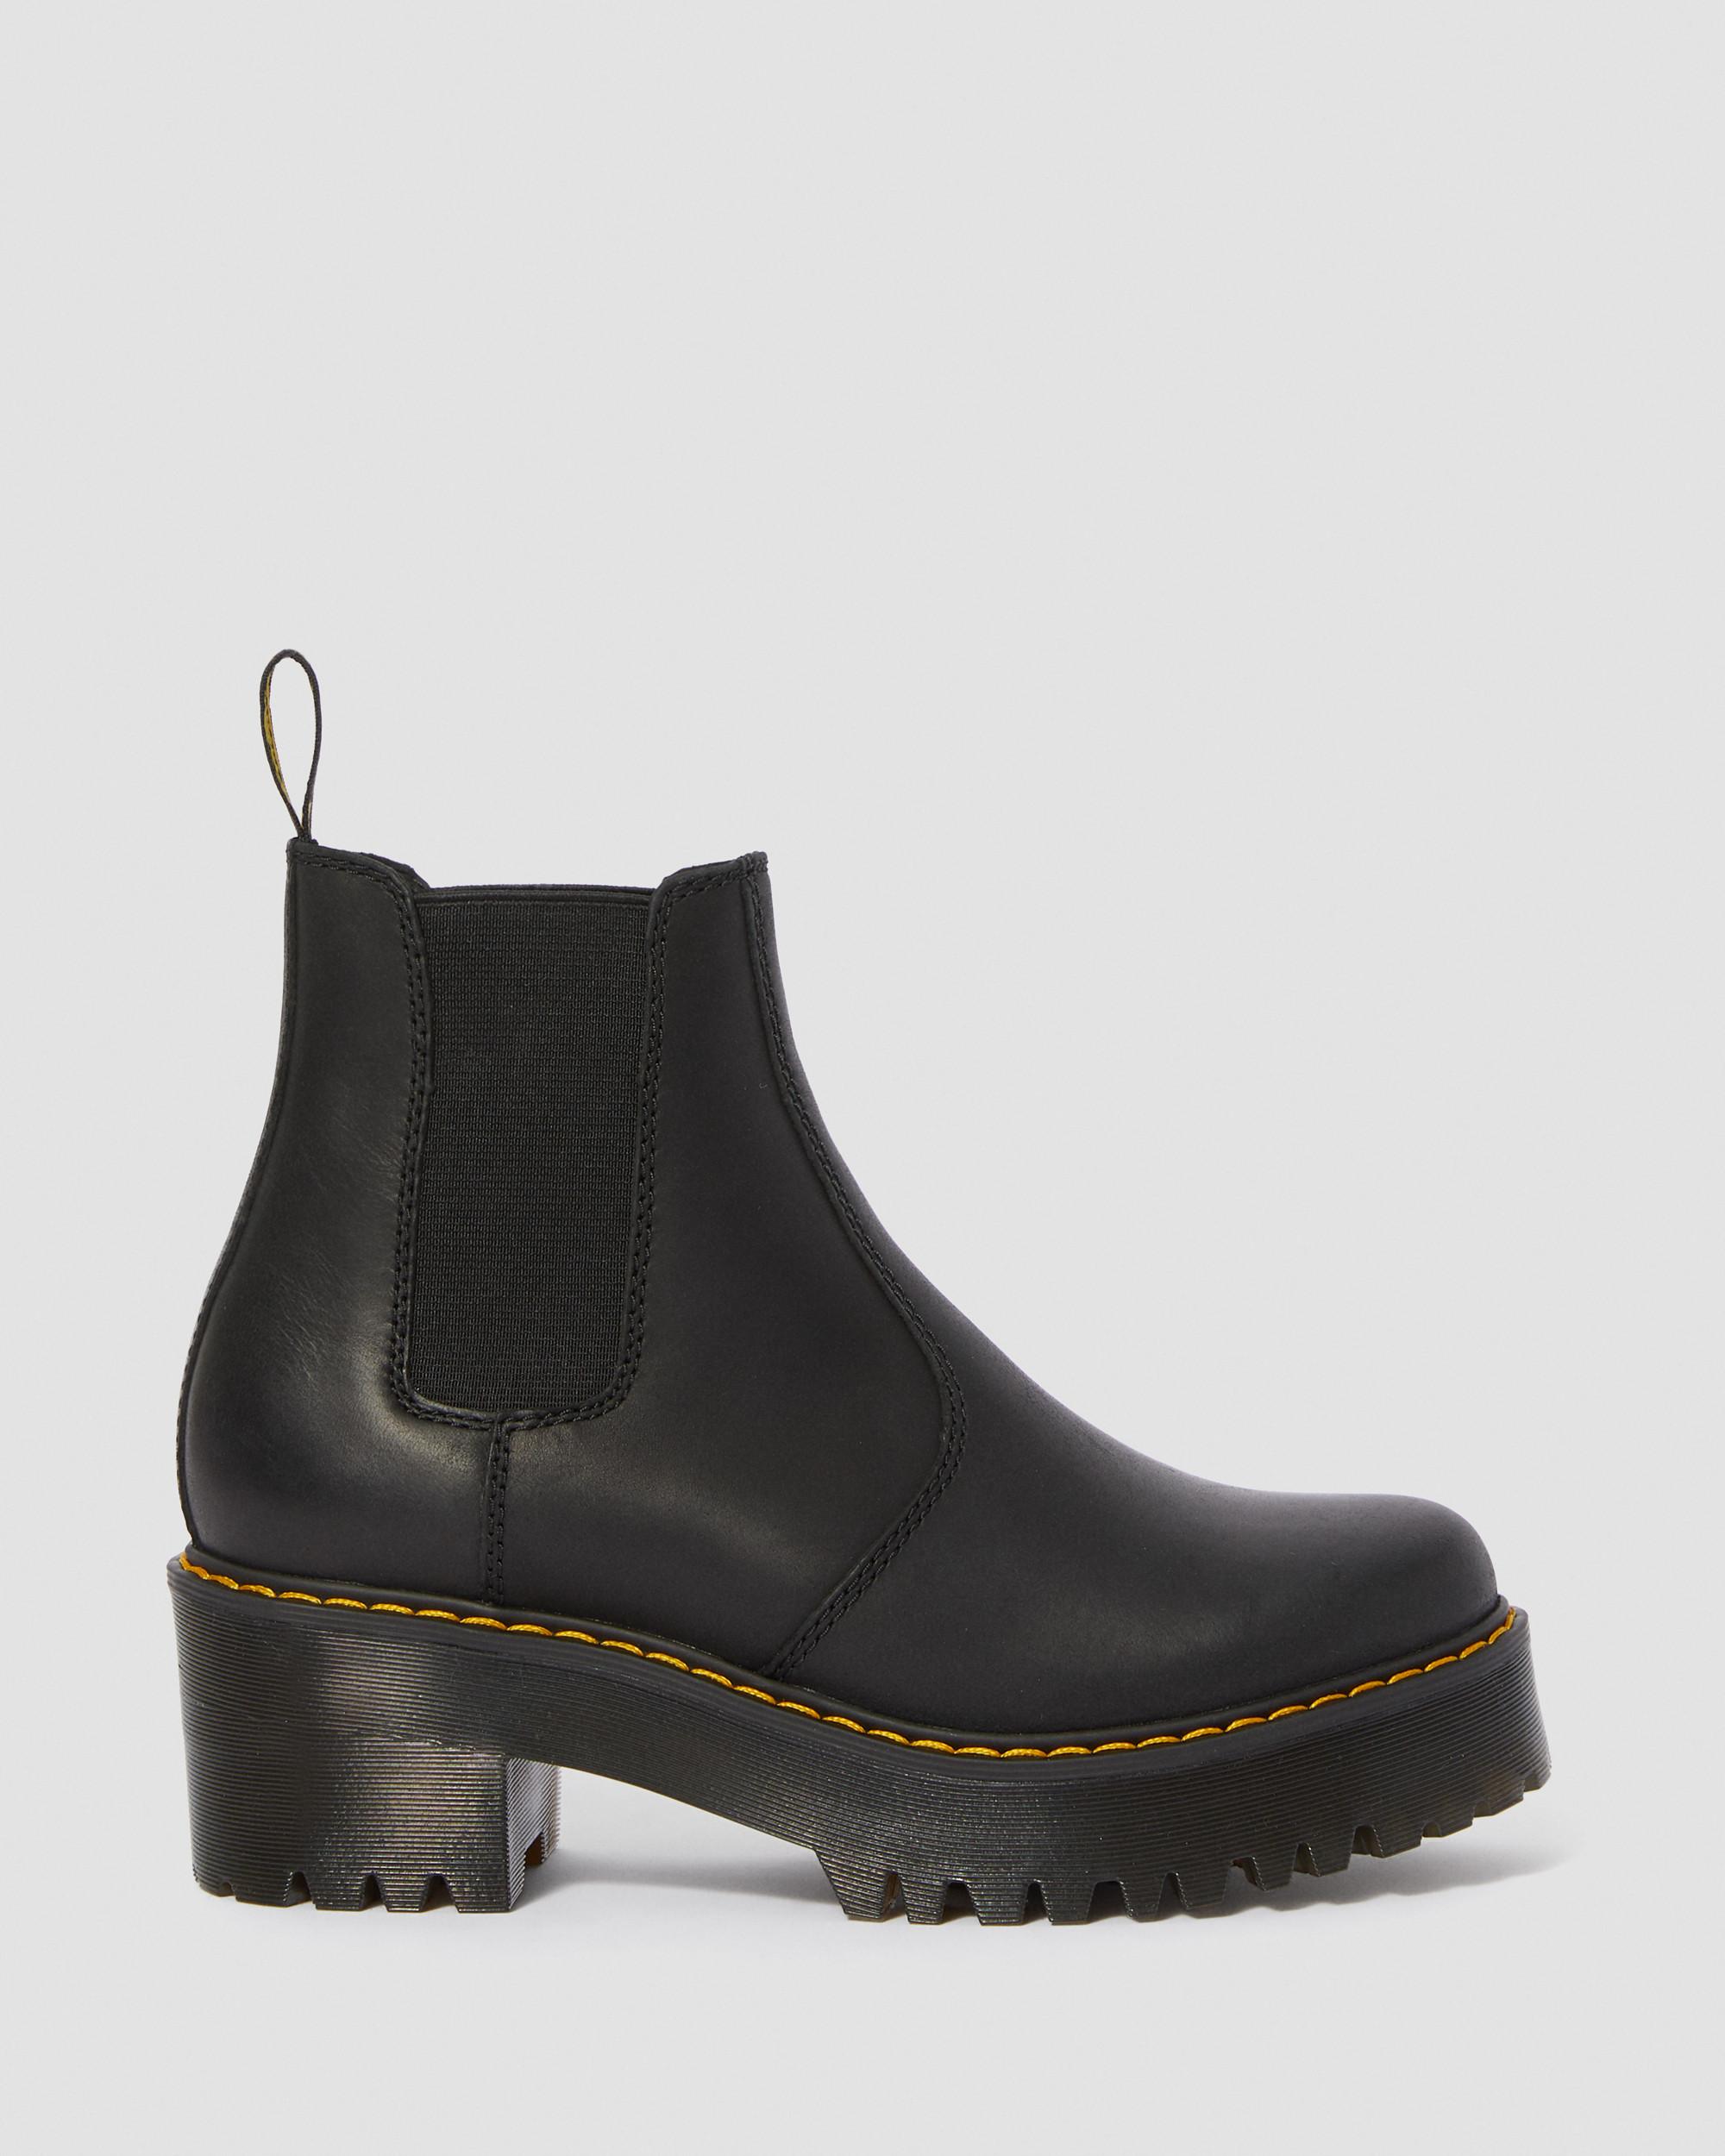 ROMETTY LEATHER CHELSEA BOOTS | Dr. Martens